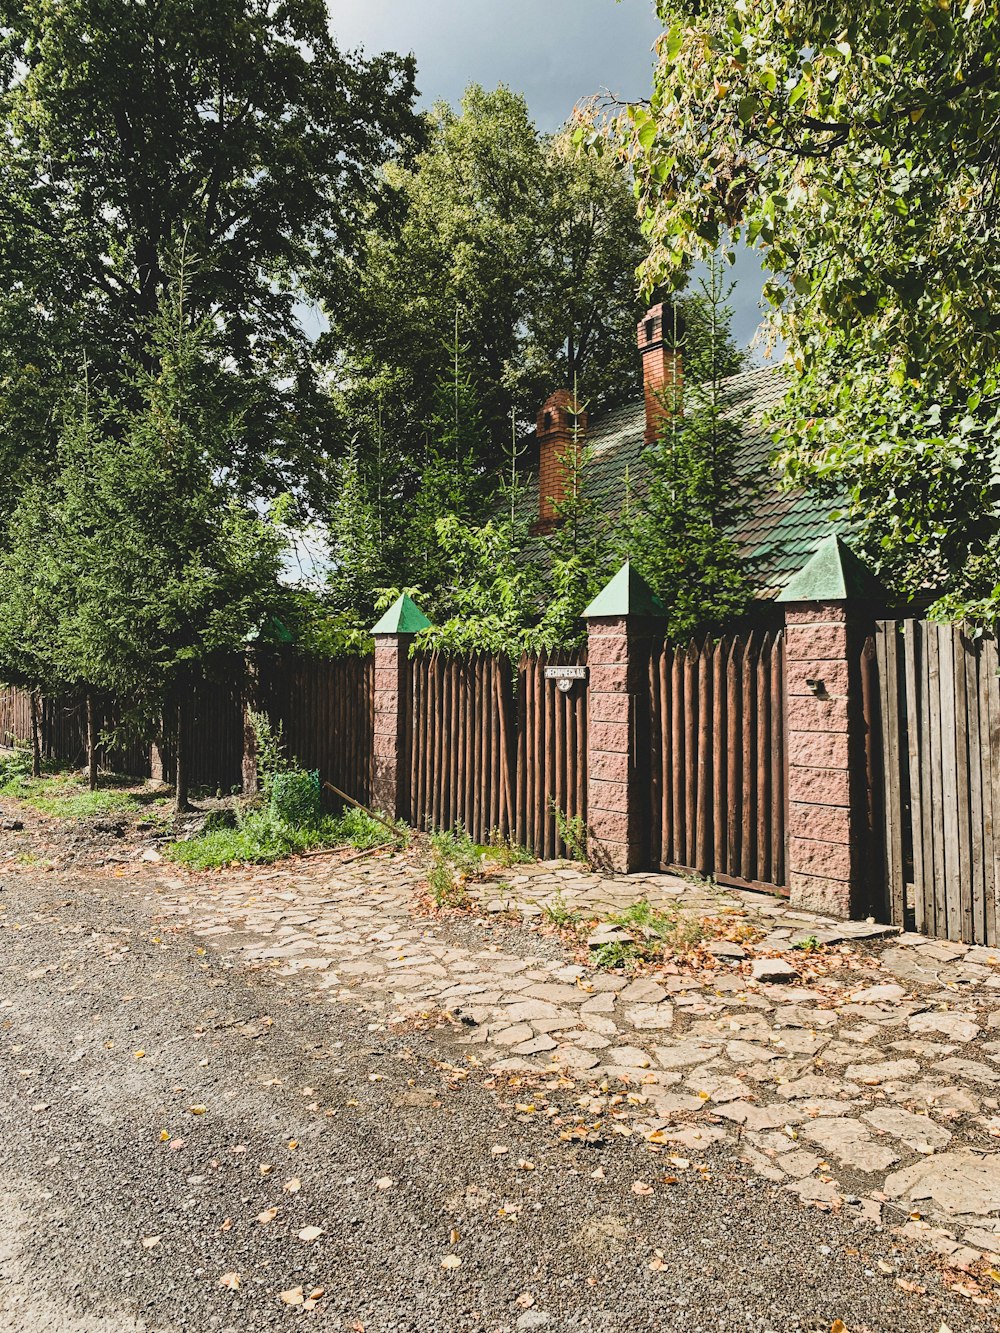 a fenced in yard with a brick building and trees